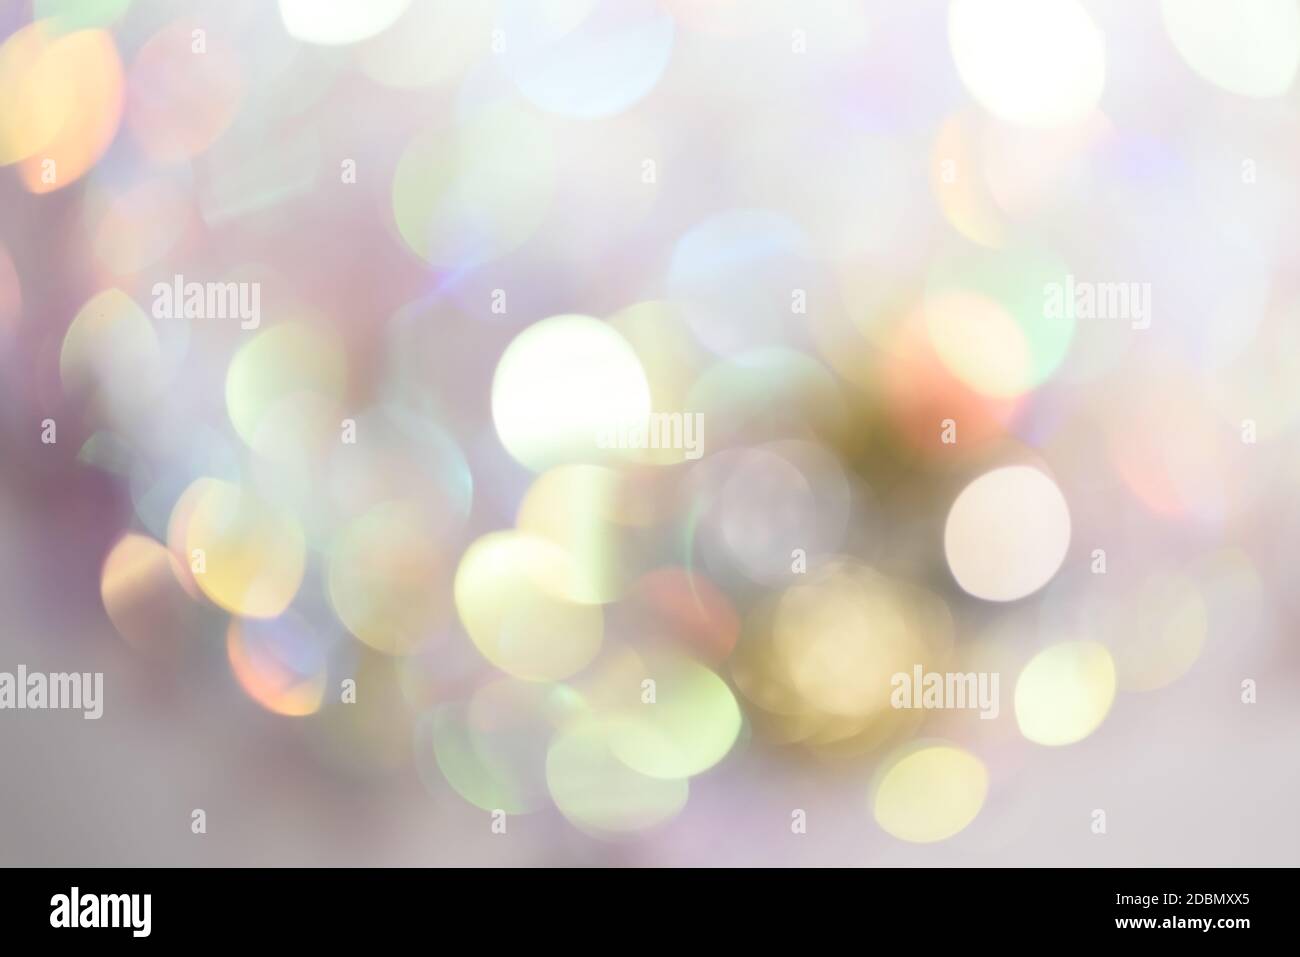 Abstract blurred rainbow glitter background. Bright and colorful